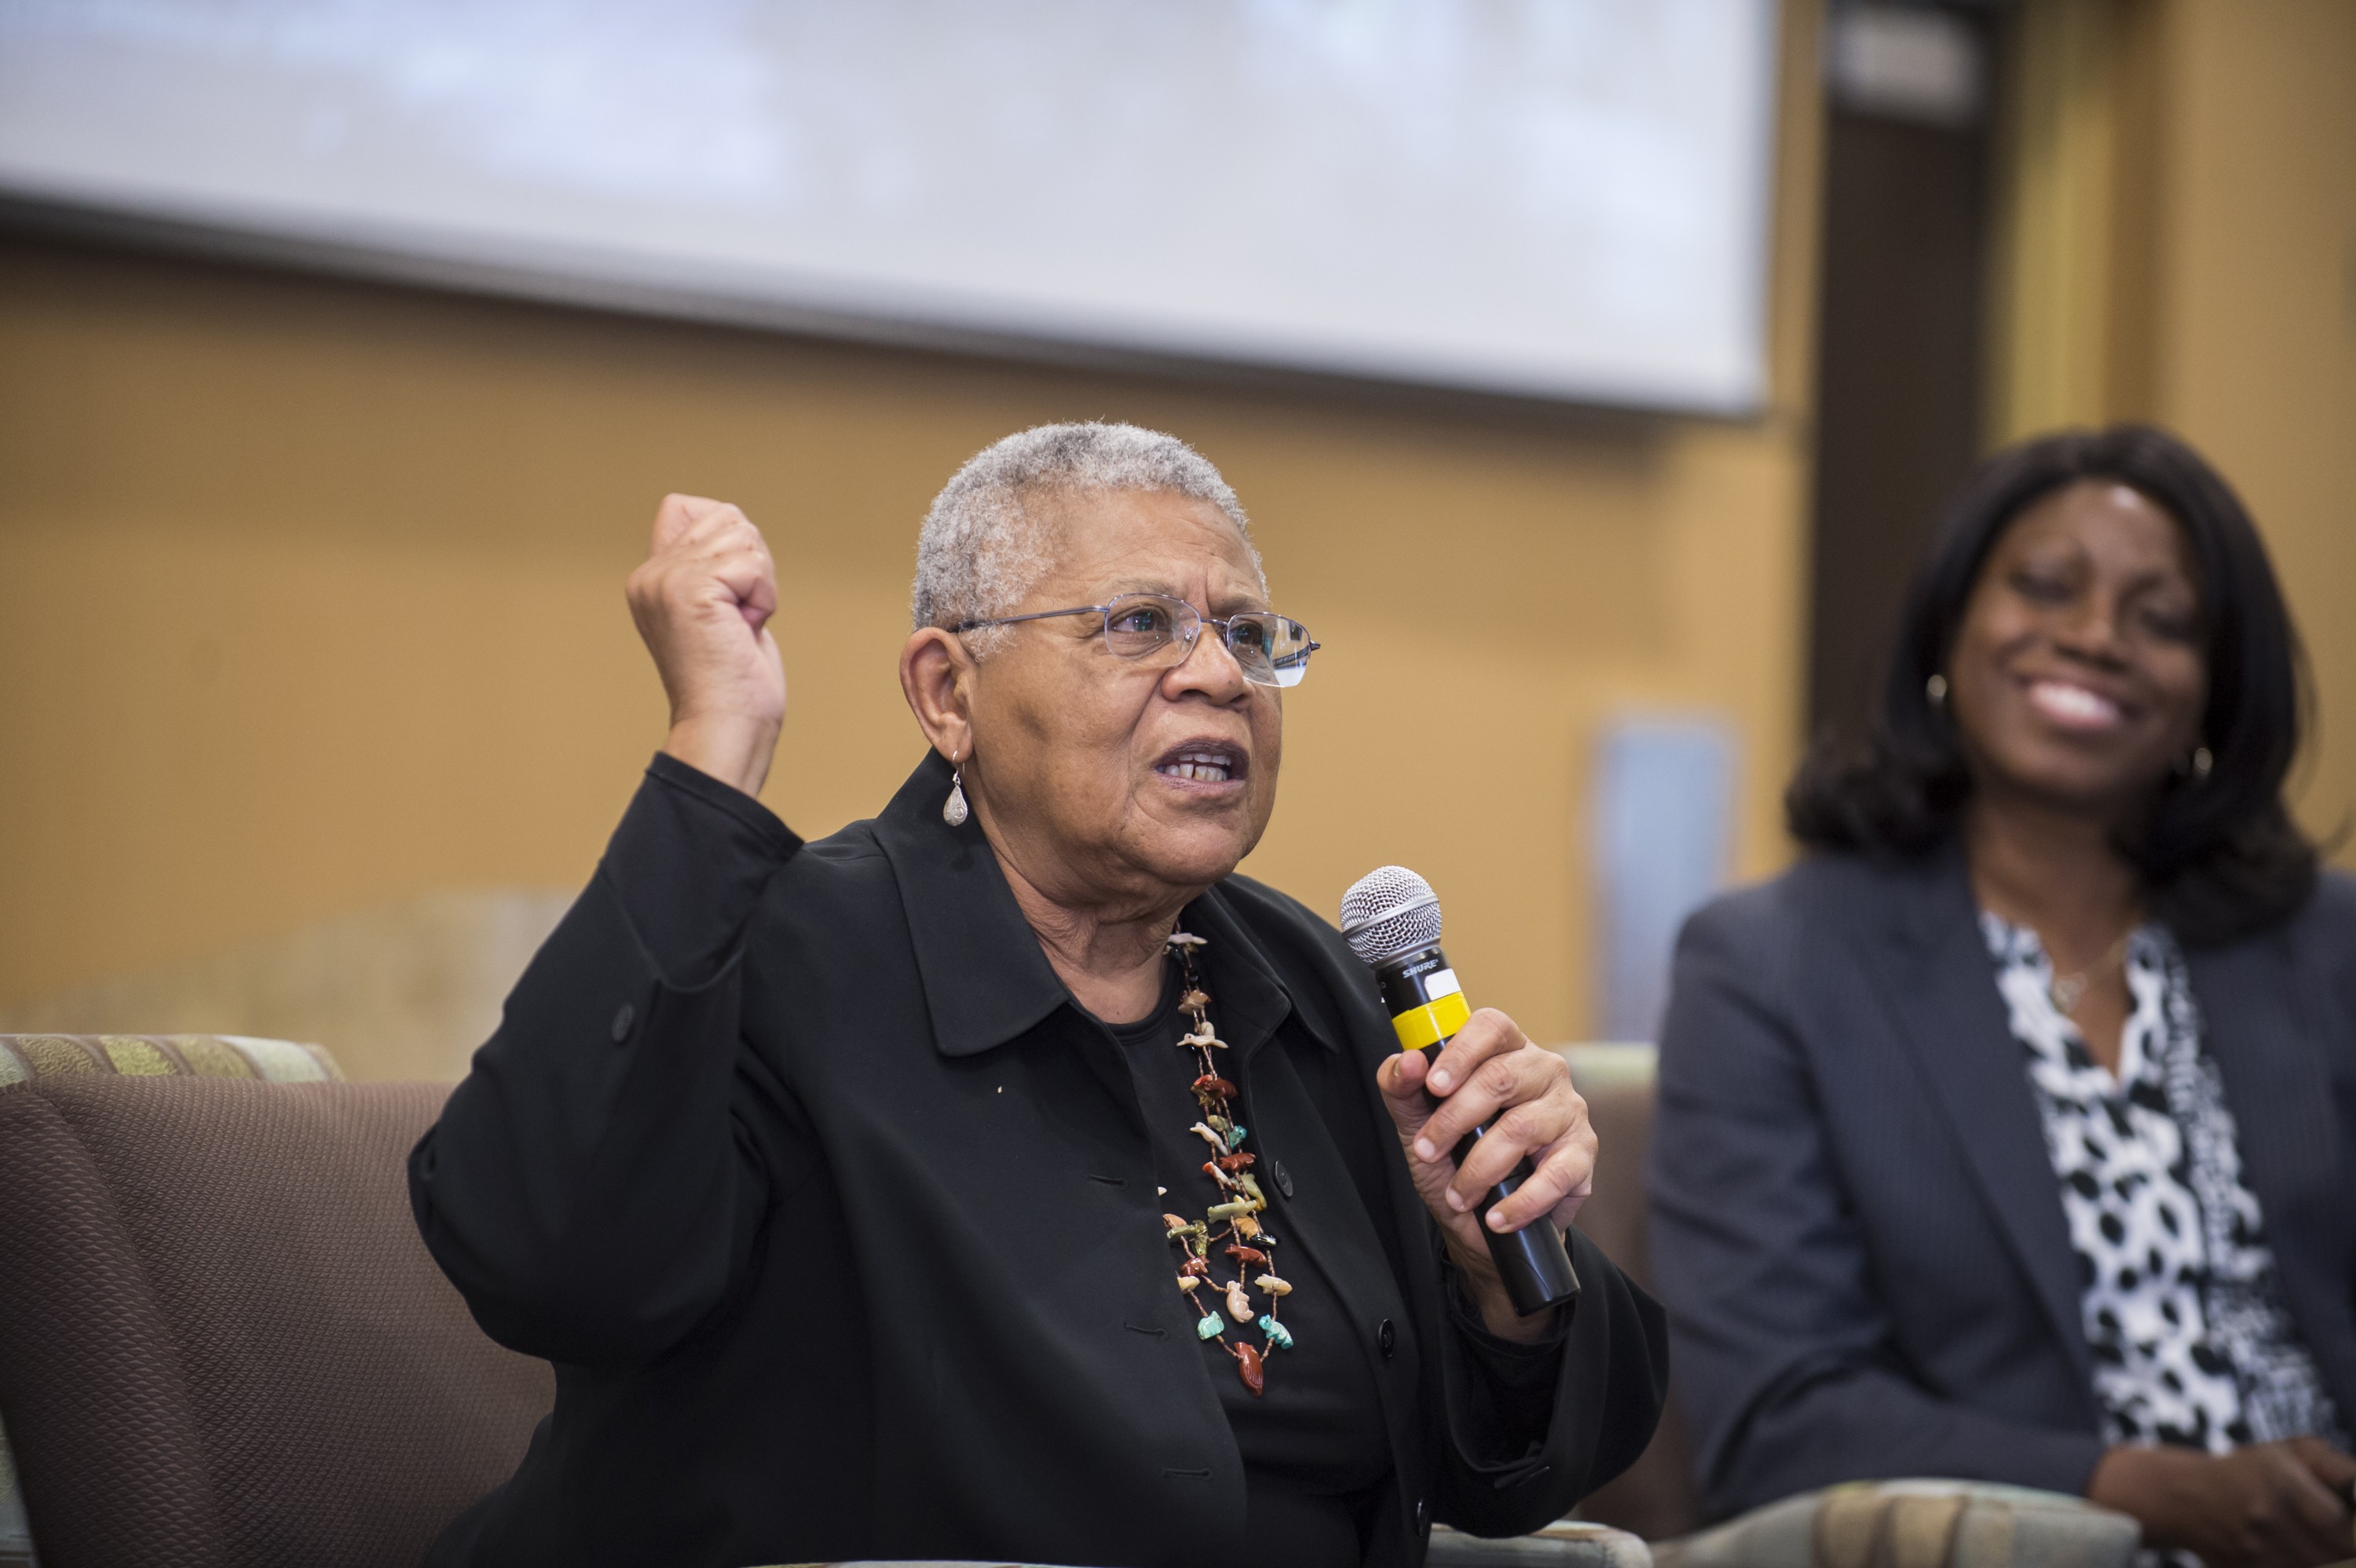 Sixty Years Later Little Rock Nine Member Sees Similar Hatred